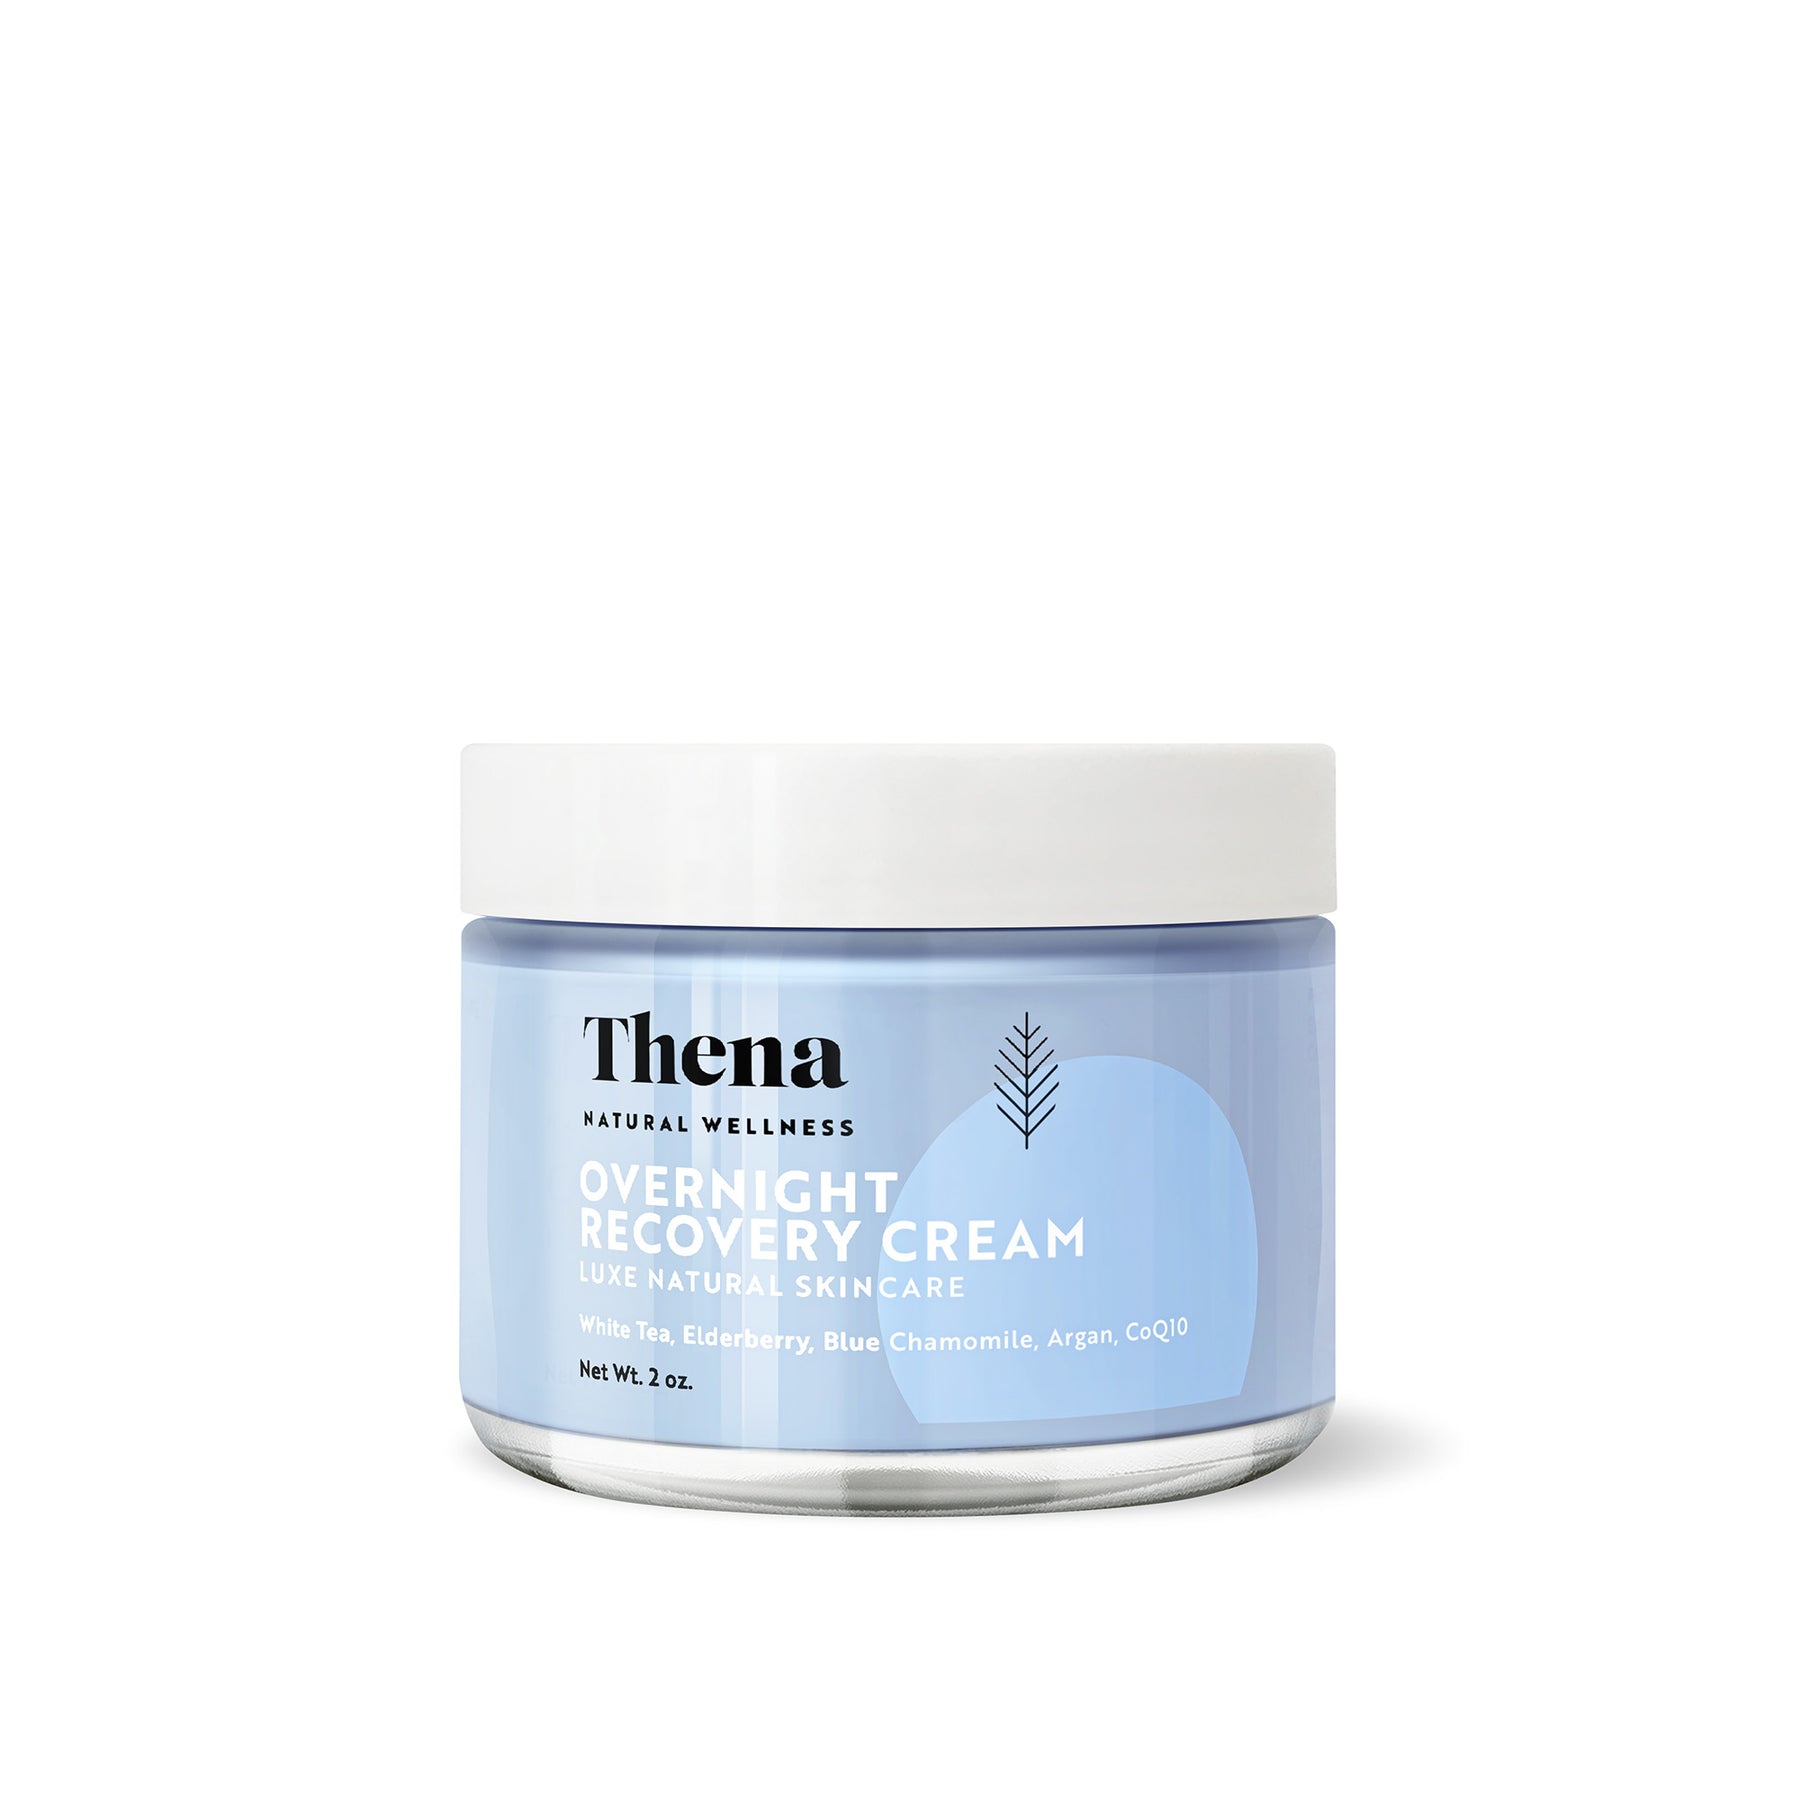 THENA Overnight Recovery Cream Anti Aging Wrinkle Face Cream